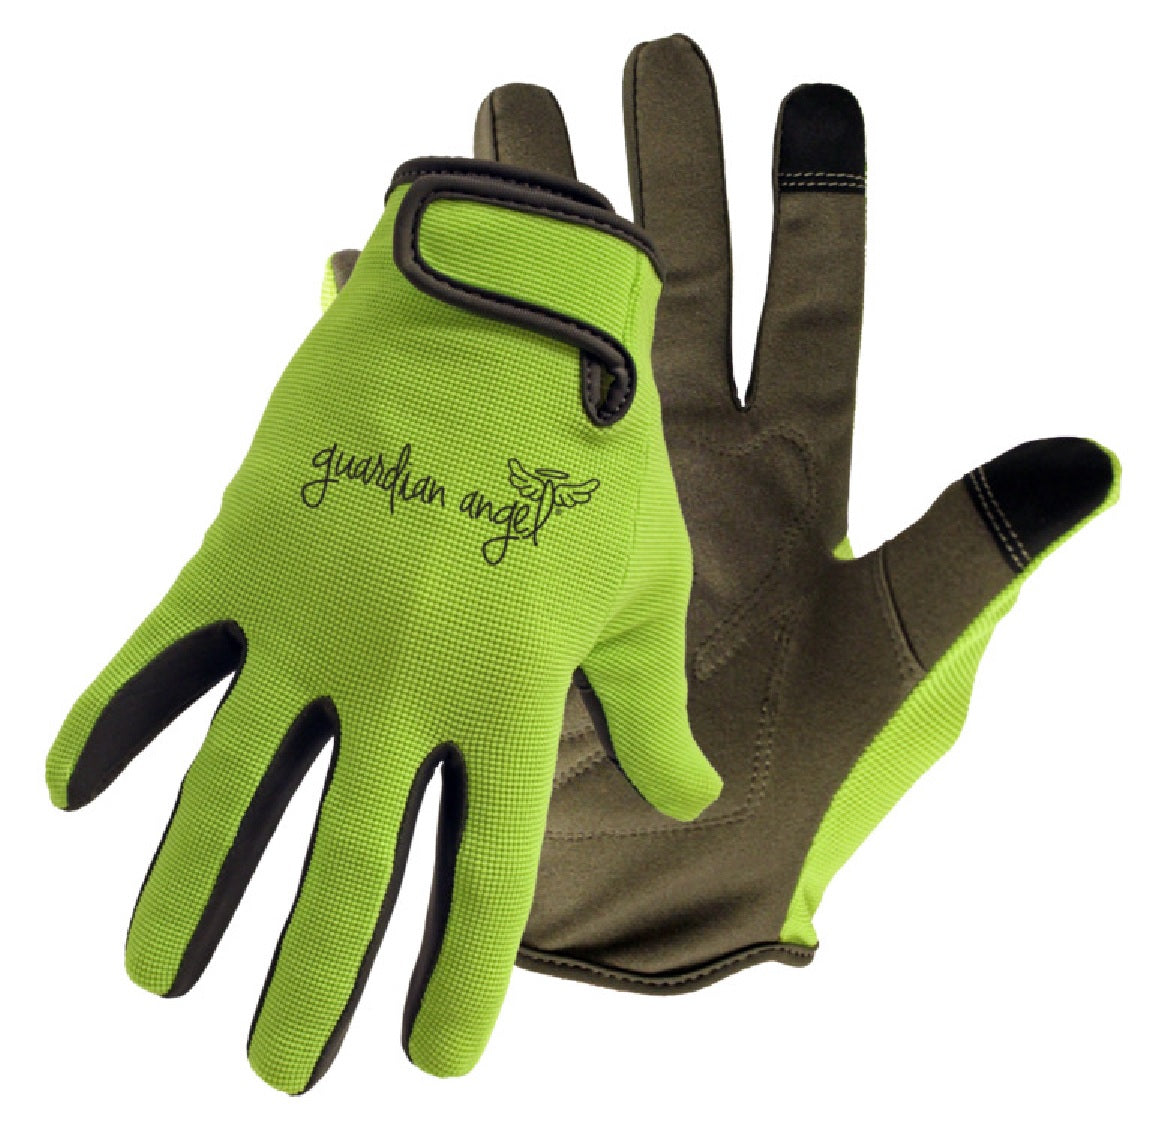 Boss 802M Mechanic Synthetic Leather Palm Gloves